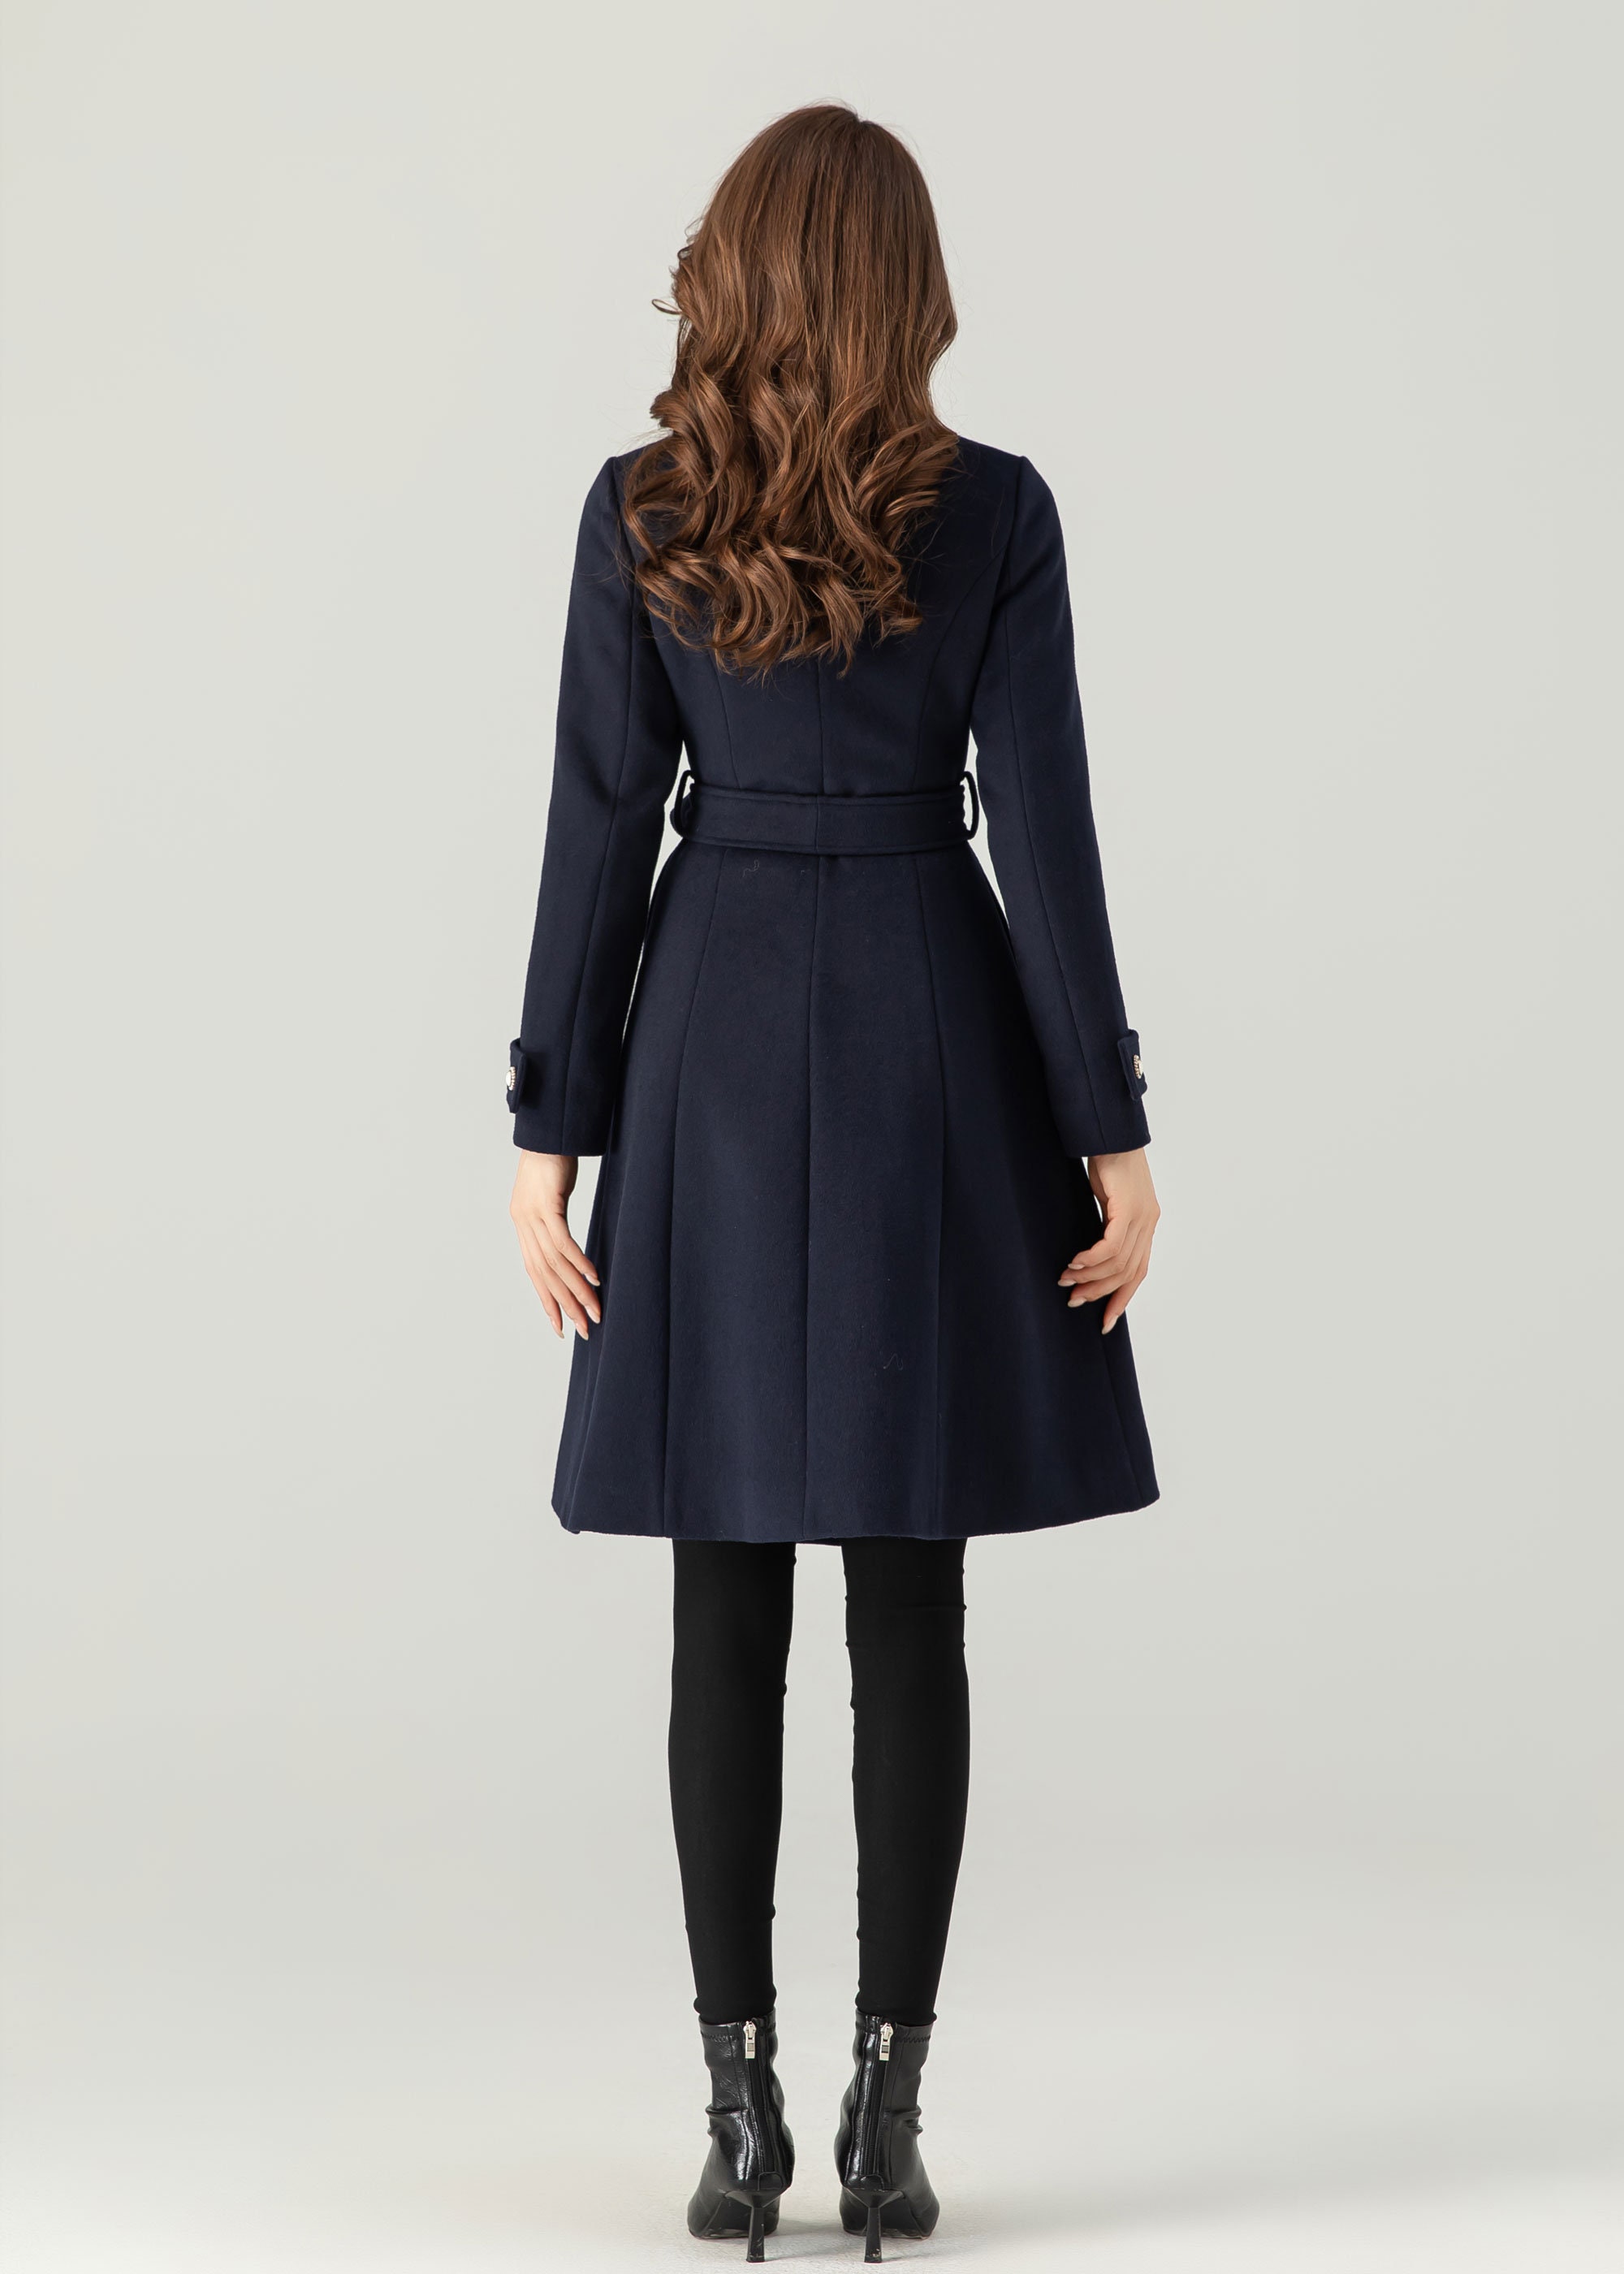 60s Inspired Fit and Flare Wool Coat Women, Swing Wool Princess